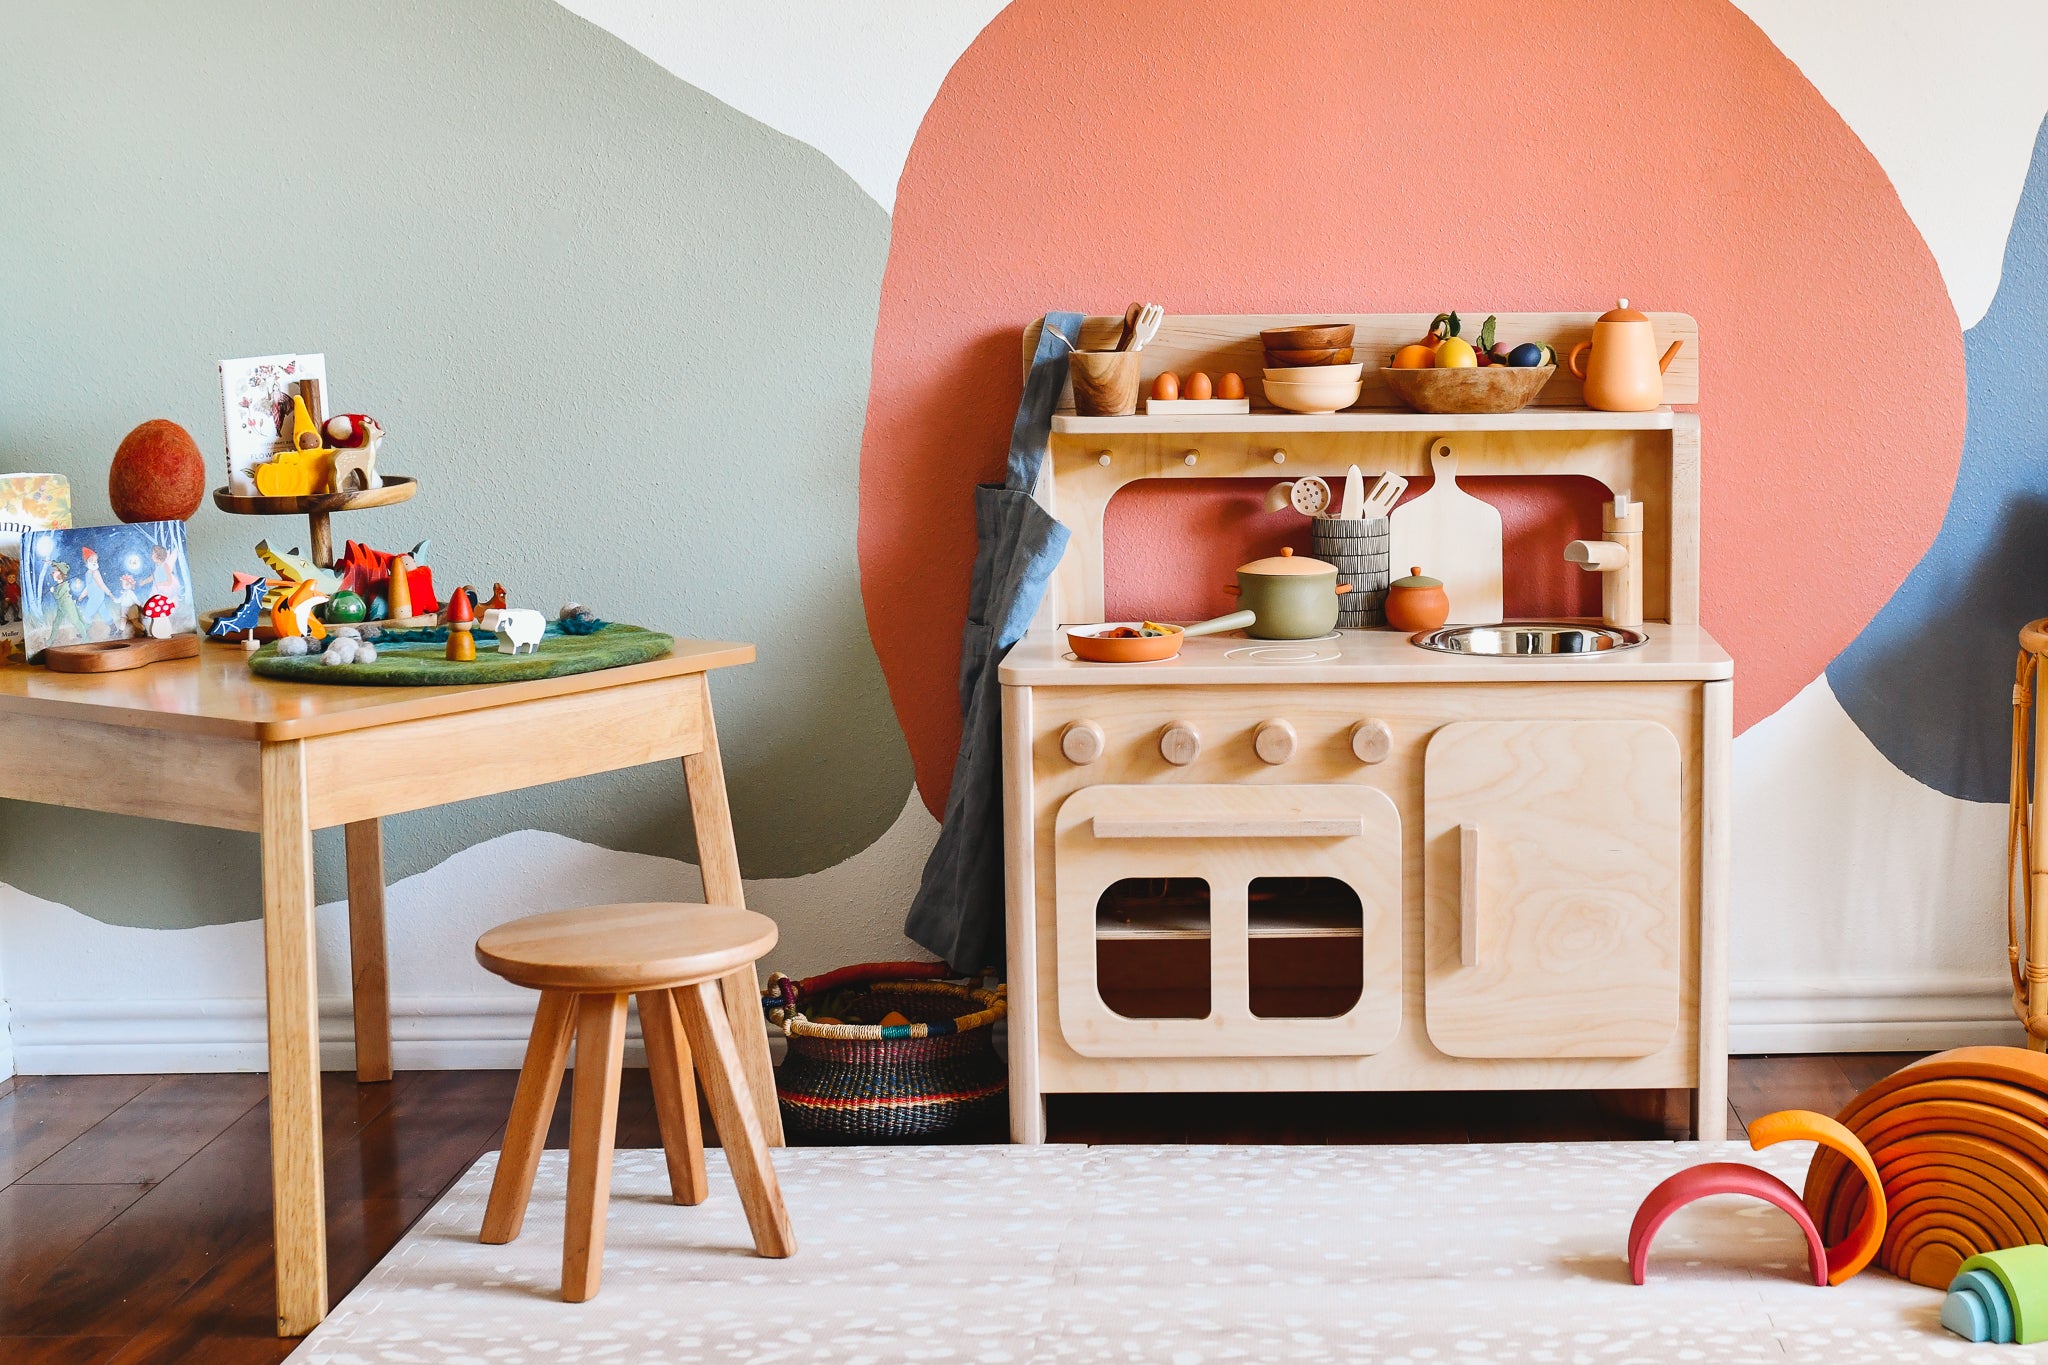 Wooden play Kitchen in a Play Room